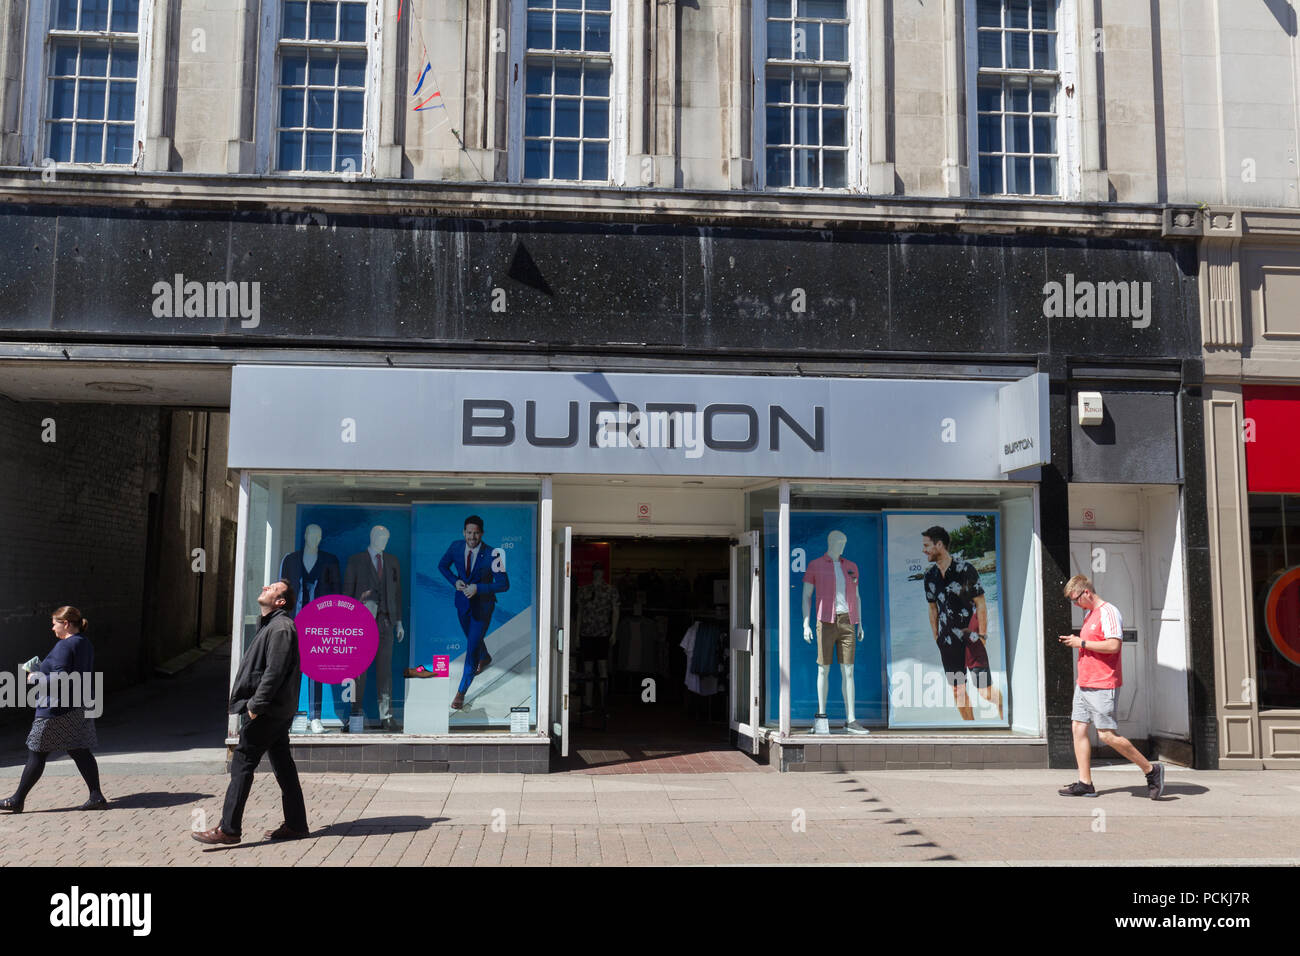 Burton Menswear High Resolution Stock Photography and Images - Alamy